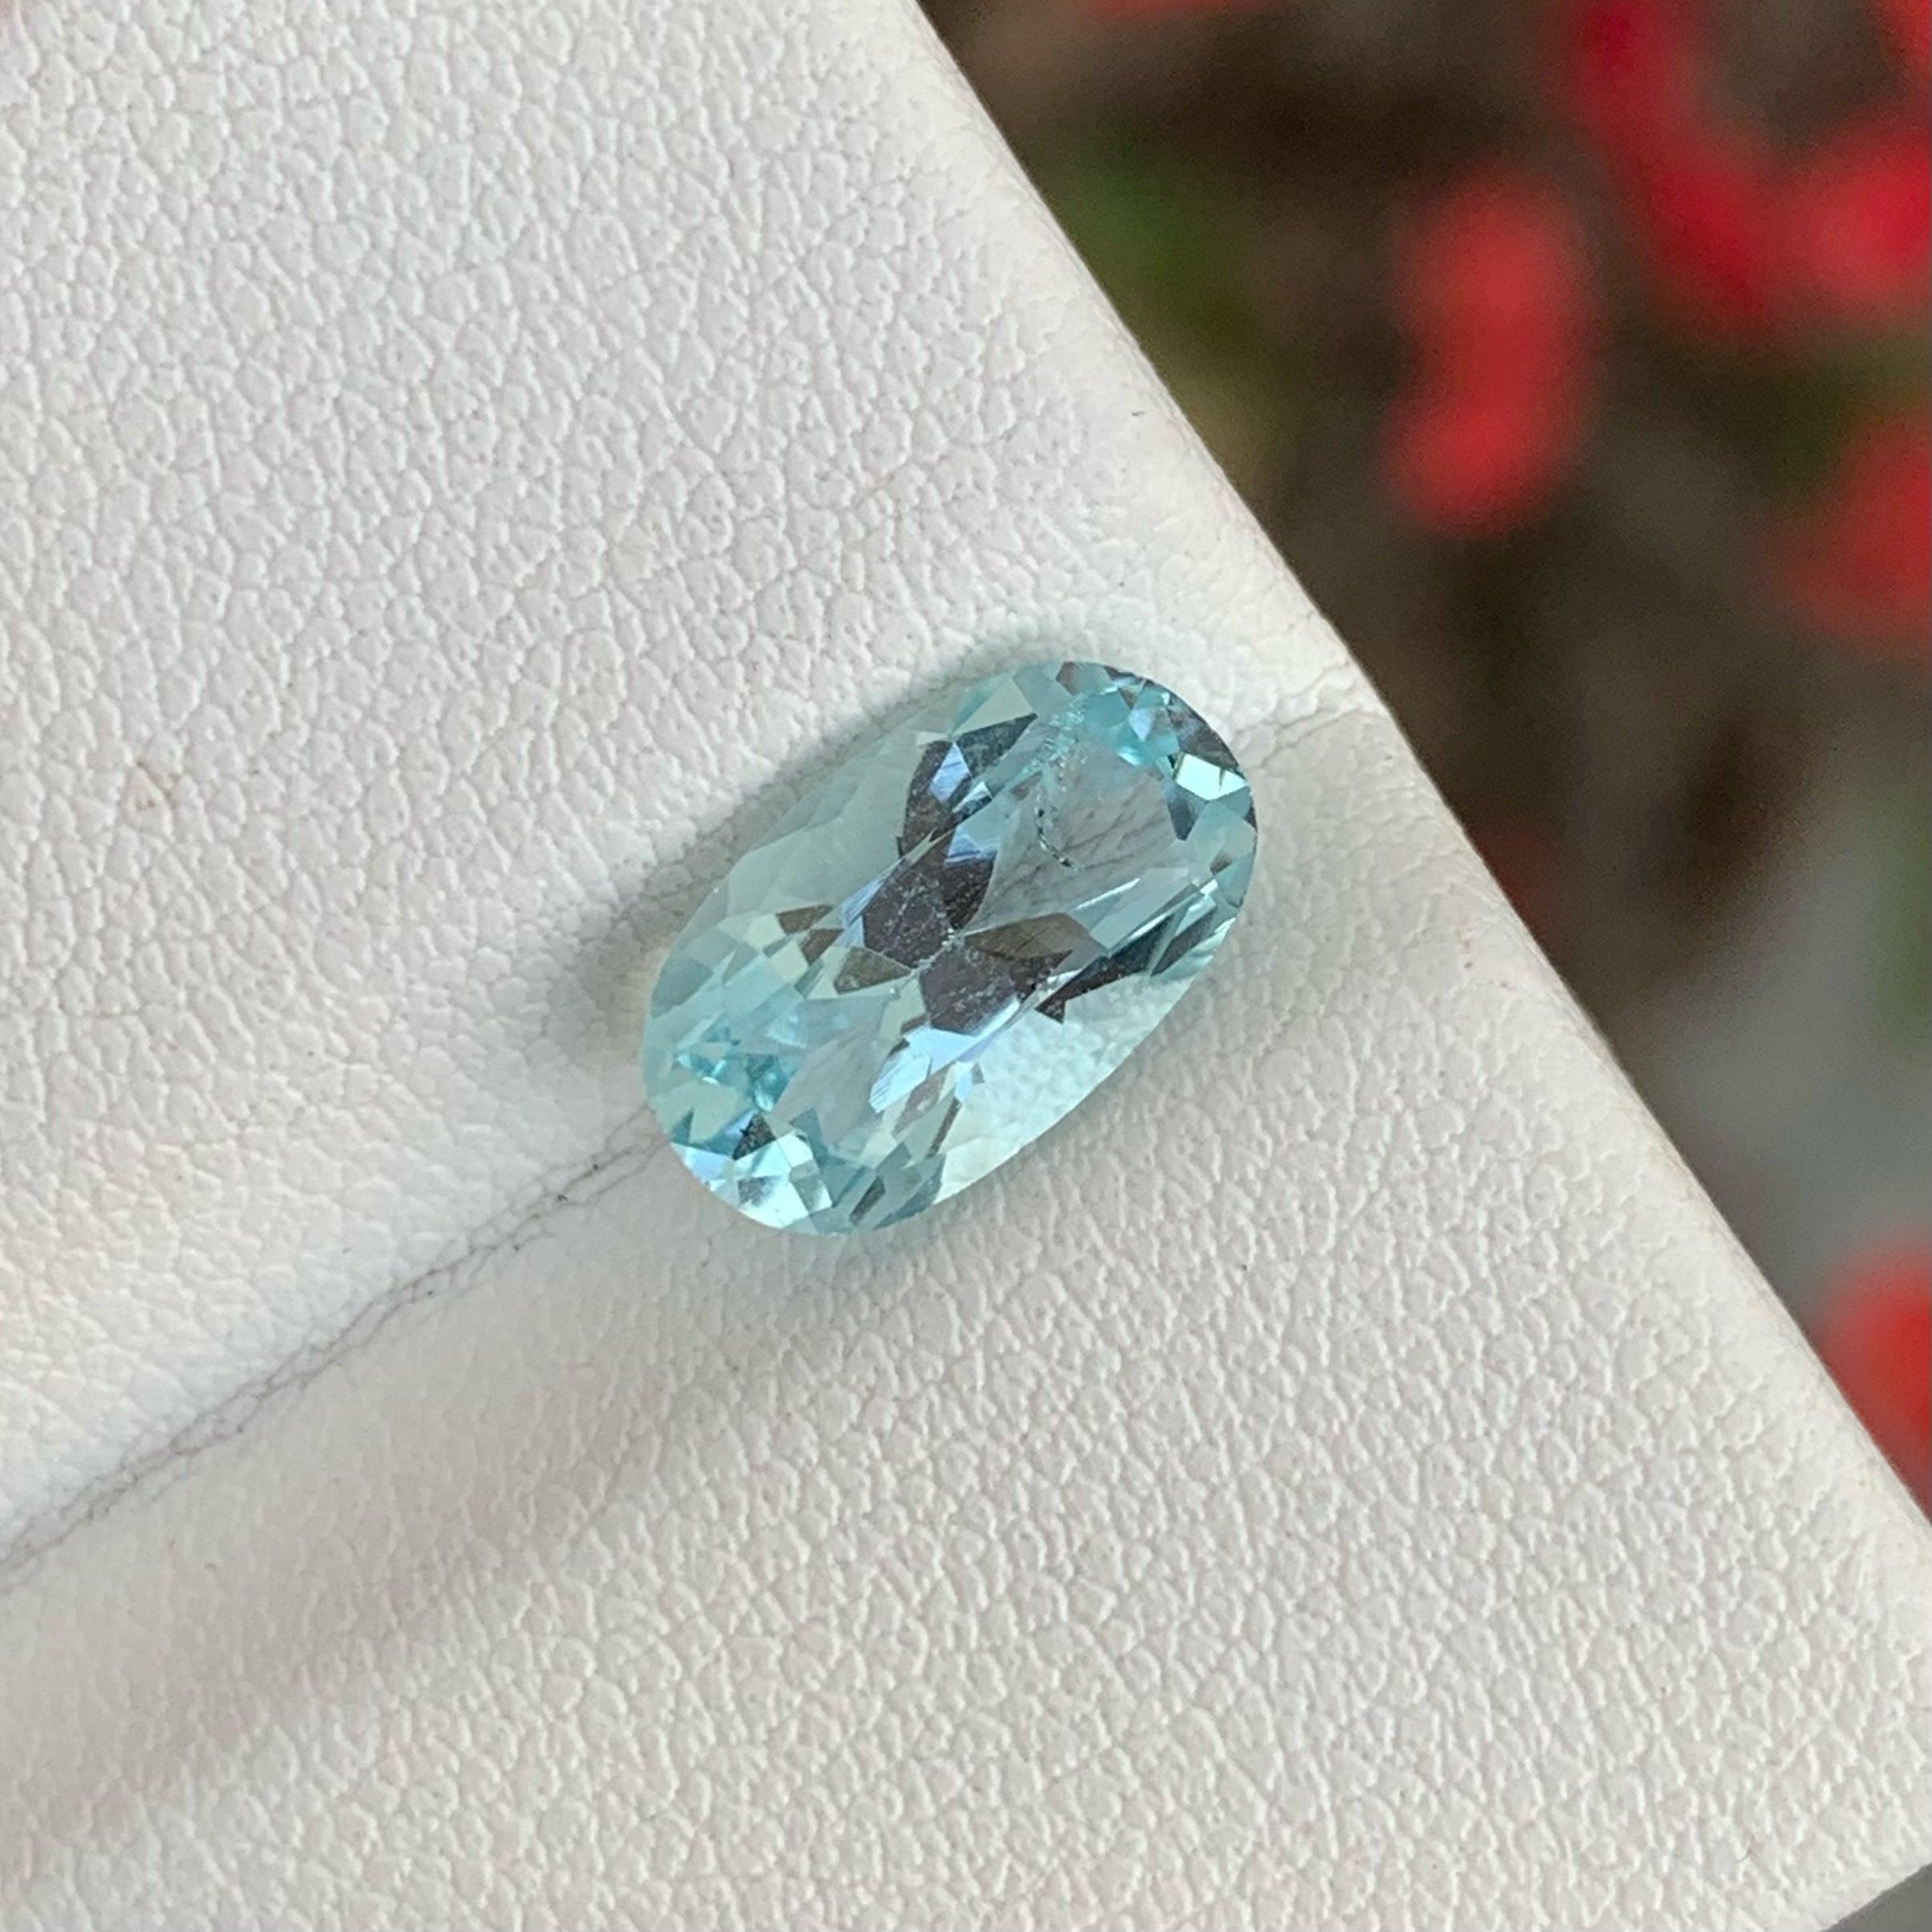 Spectacular Natural Loose Aquamarine Stone, available for sale at wholesale price natural high quality 2.10 Carats VVS Clarity Loose Aquamarine from Pakistan.

Product Information:
GEMSTONE NAME: Spectacular Natural Loose Aquamarine Stone
WEIGHT: